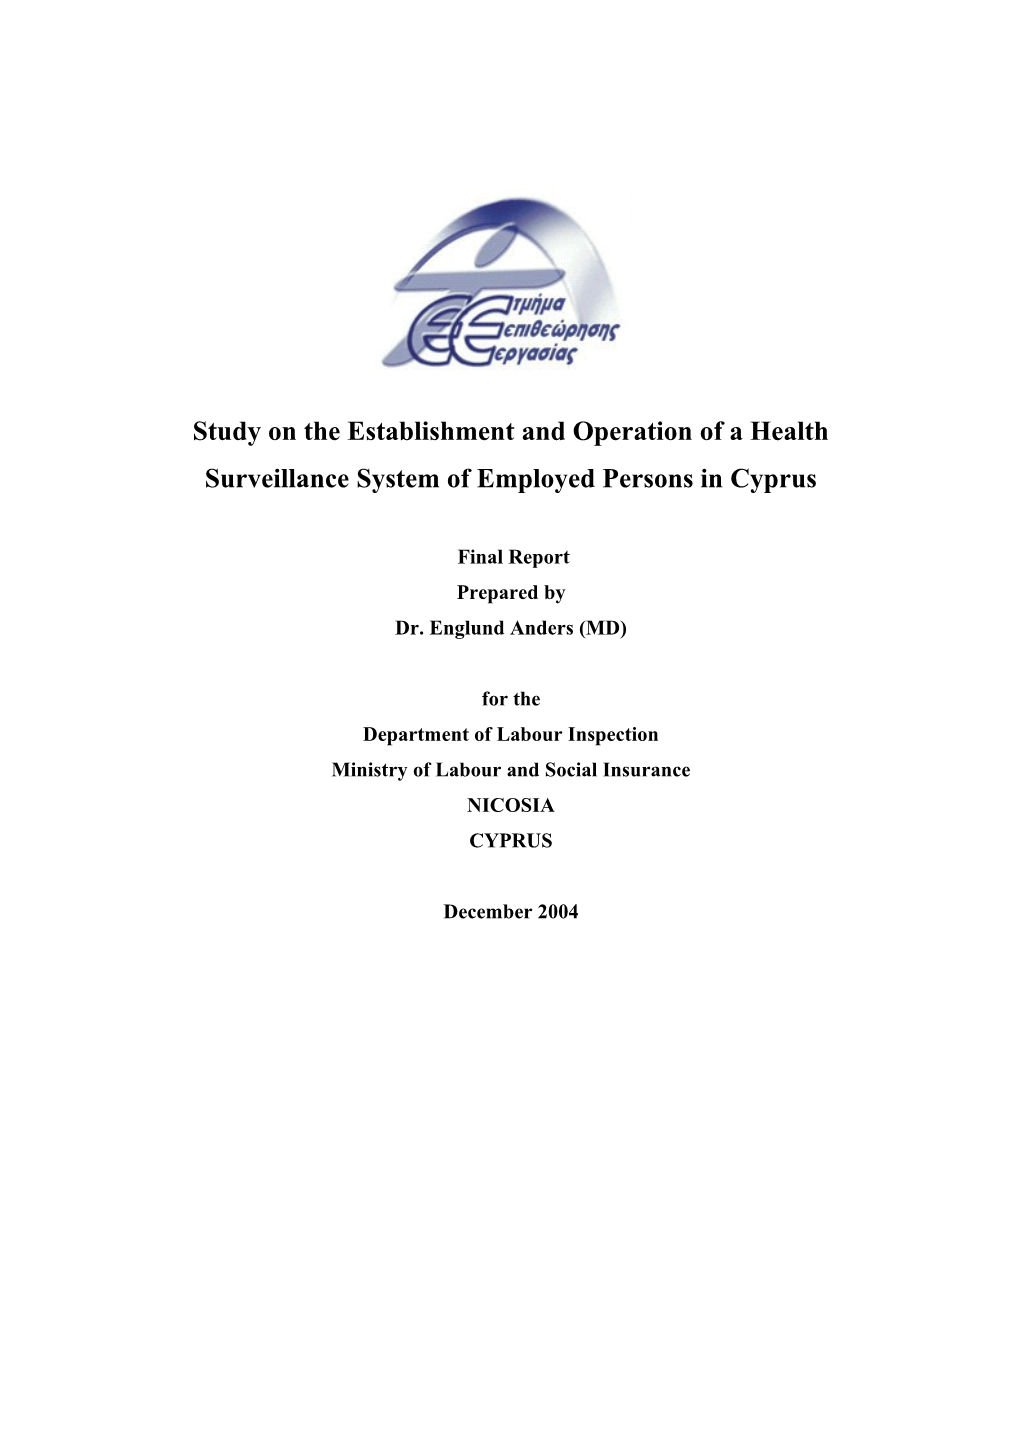 Proposals for Health Surveillance System in Cyprus